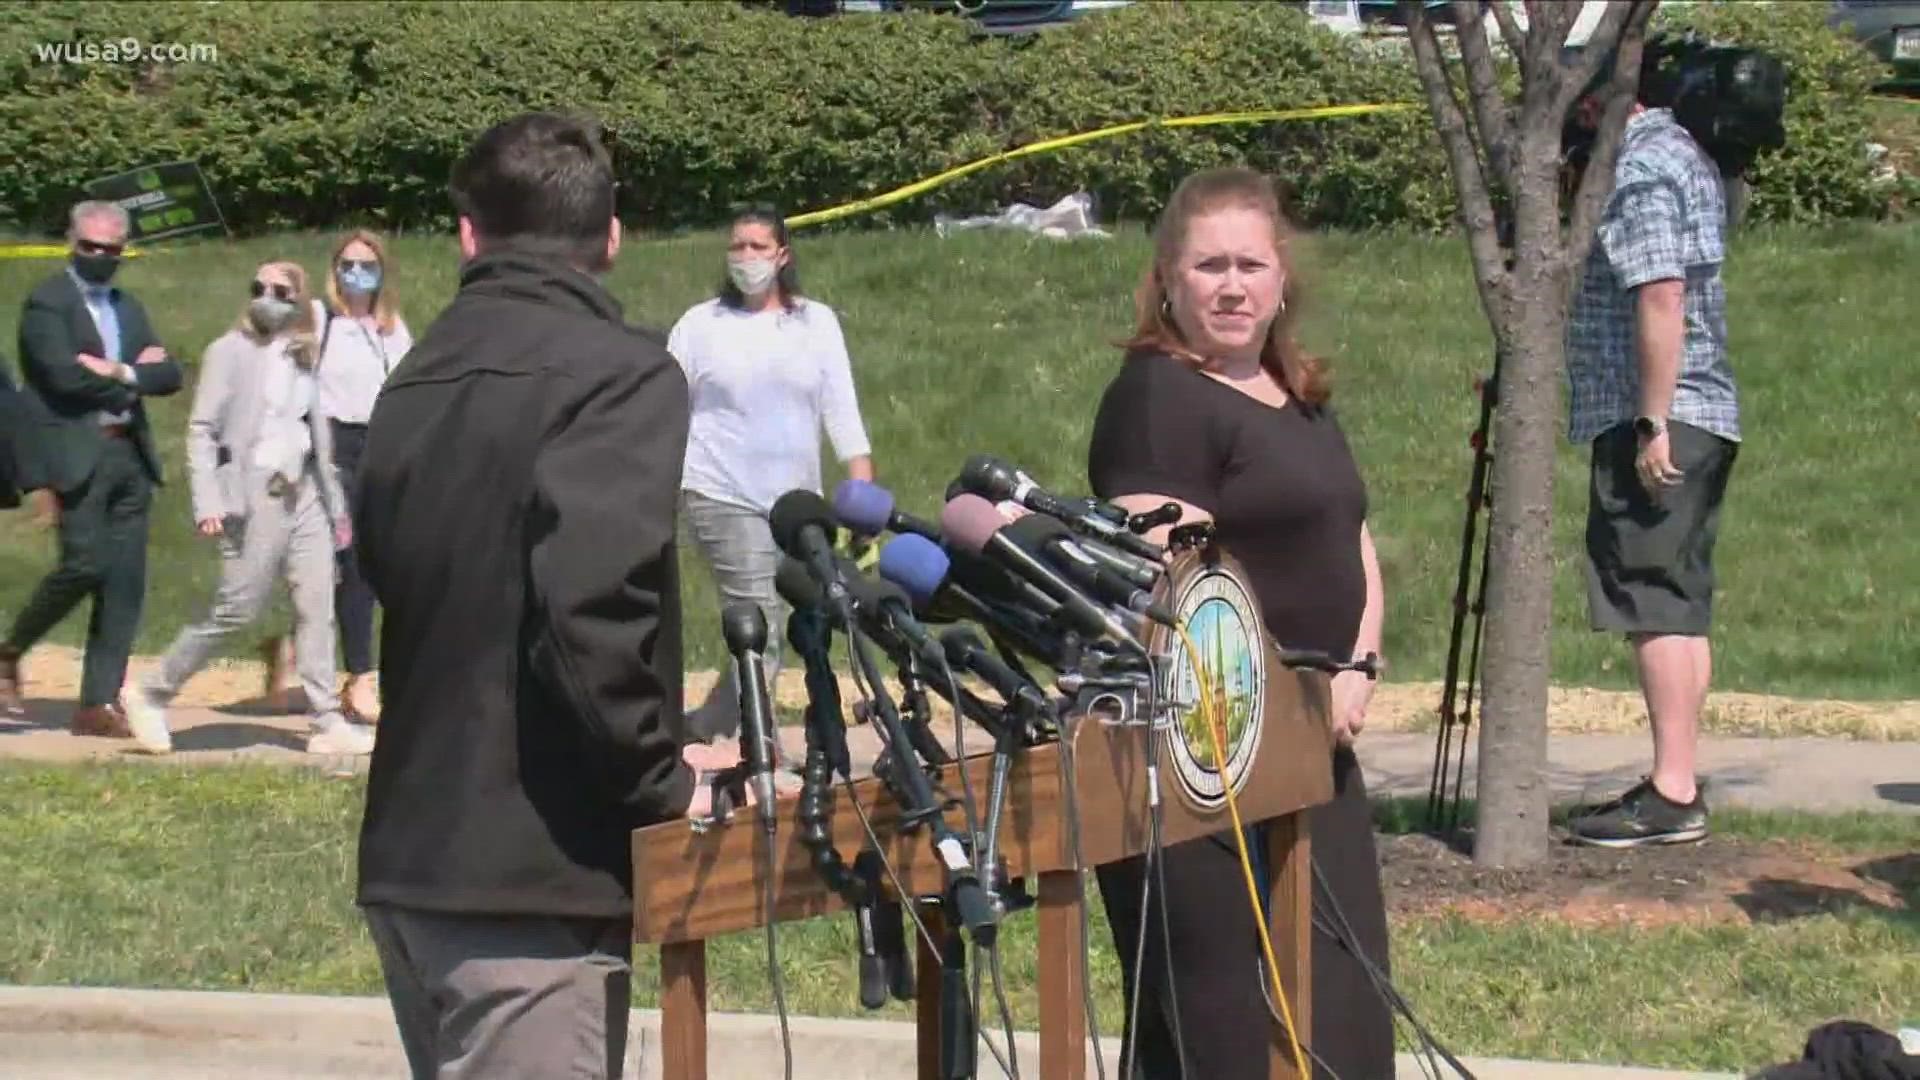 Authorities provide new updates on the Frederick shooting by a Navy medic that left two victims in critical condition.